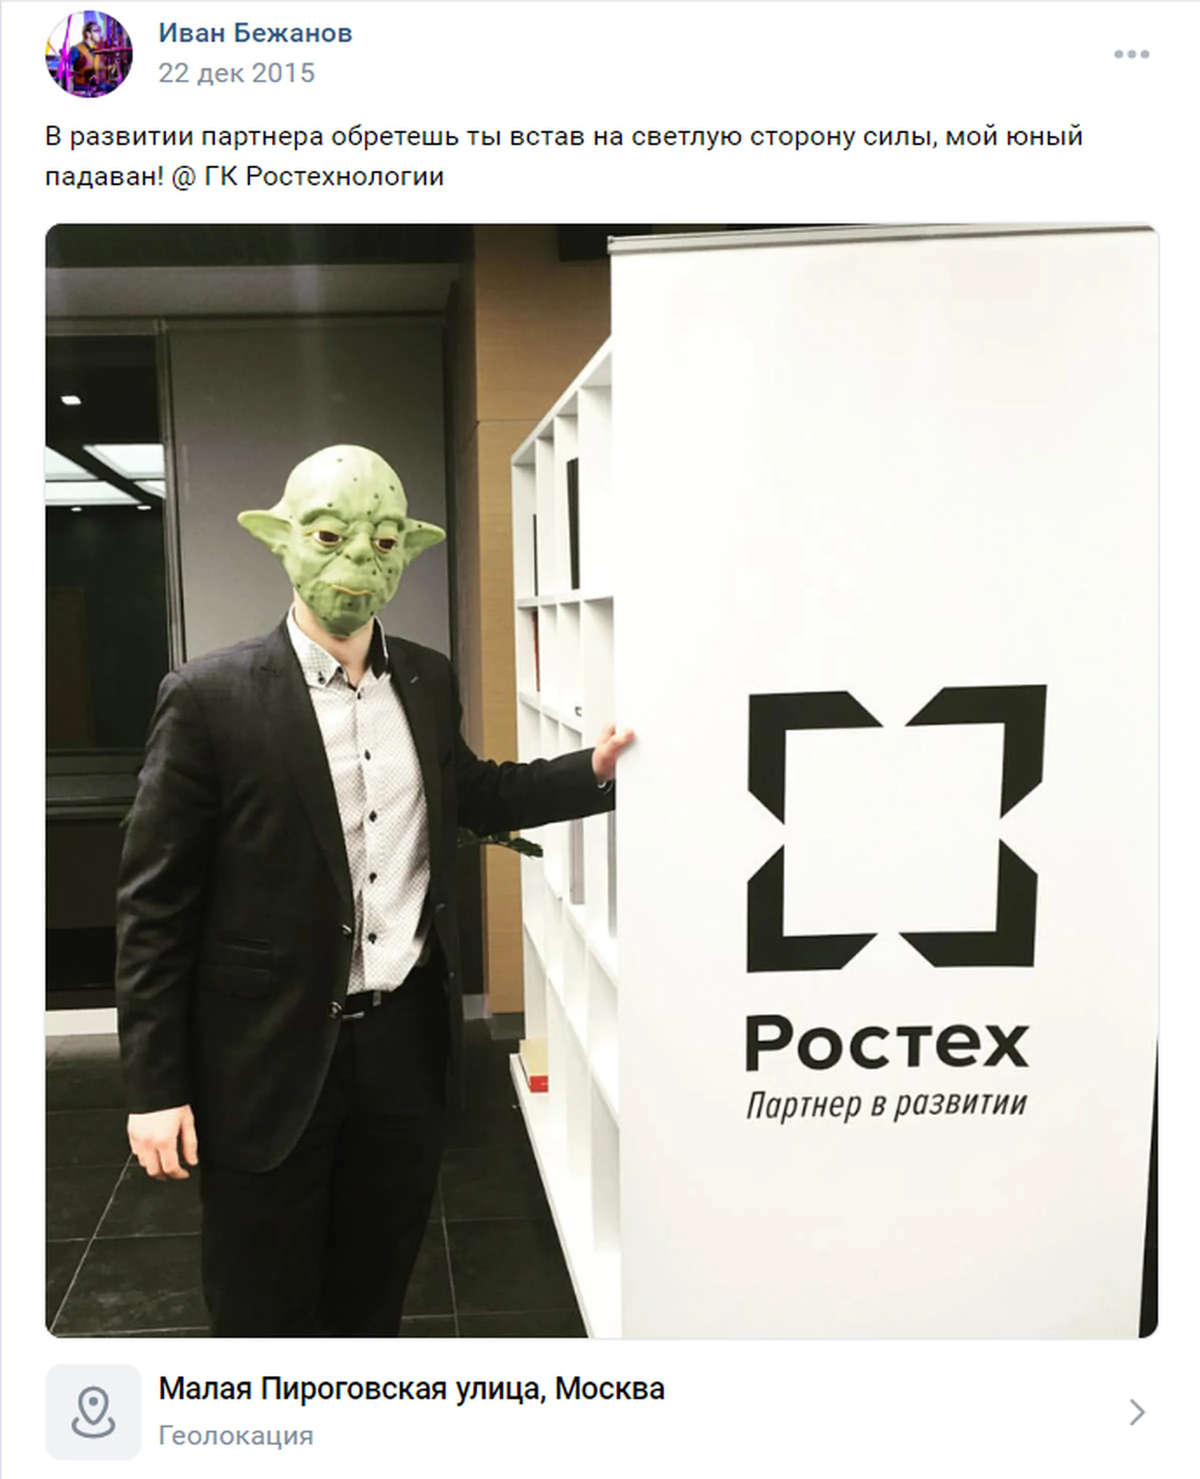 Ivan Bezhanov in an image from the Star Wars franchise at the stand of defense state corporation Rostec